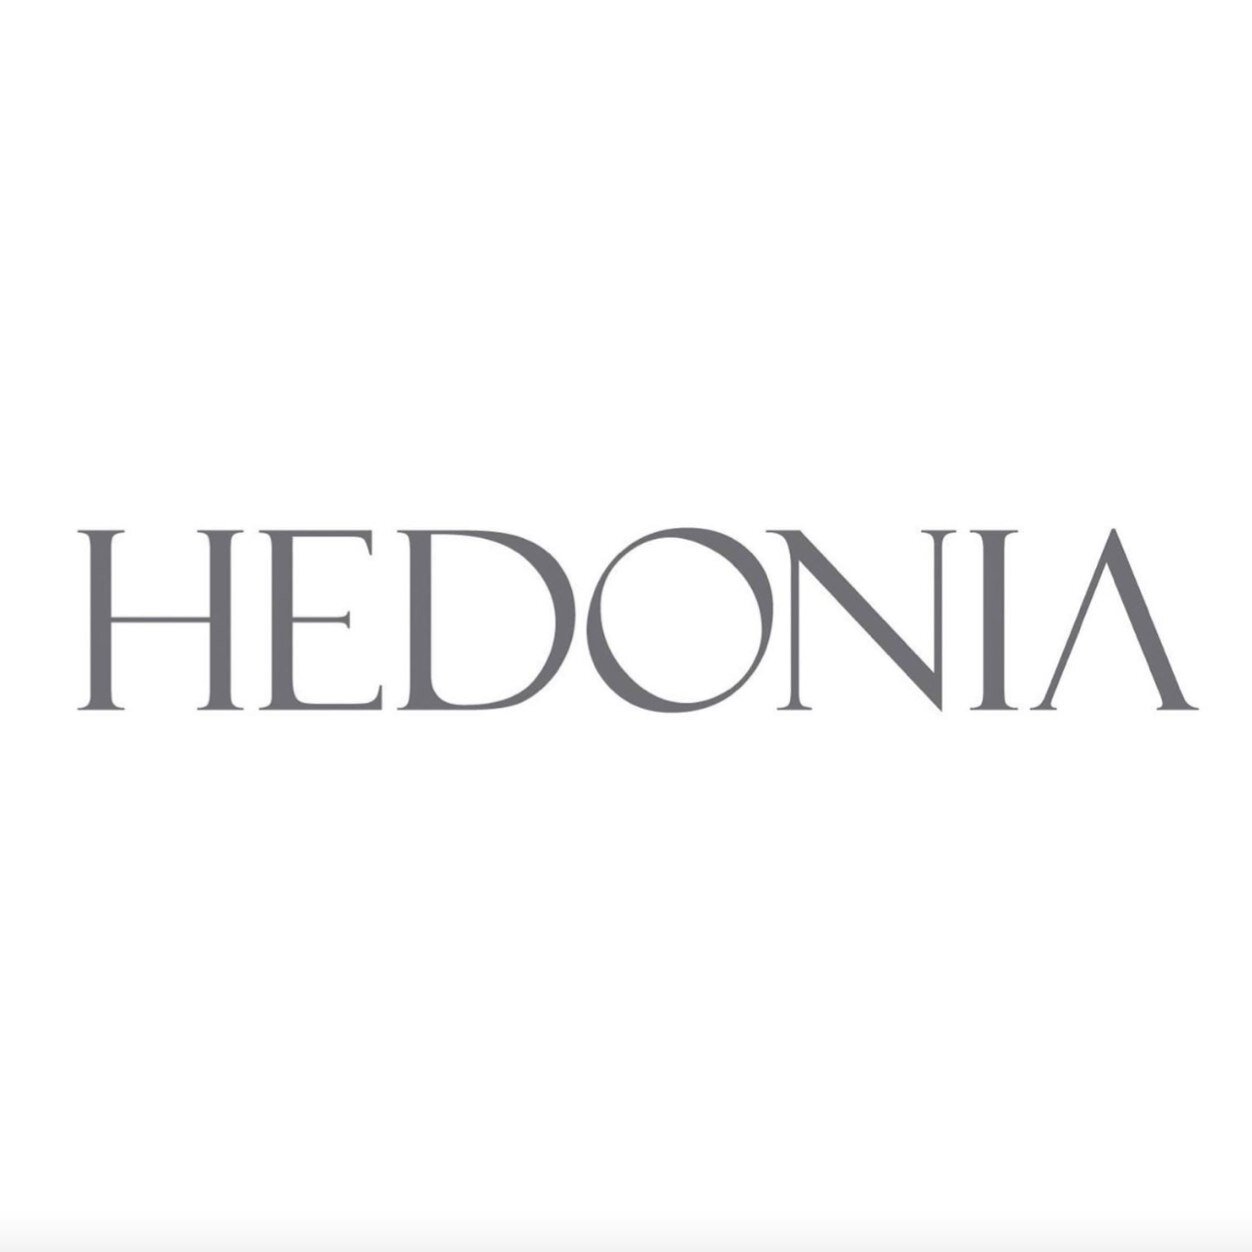 Dresses for all occasions, Hedonia is a fresh young British ladies wear brand.